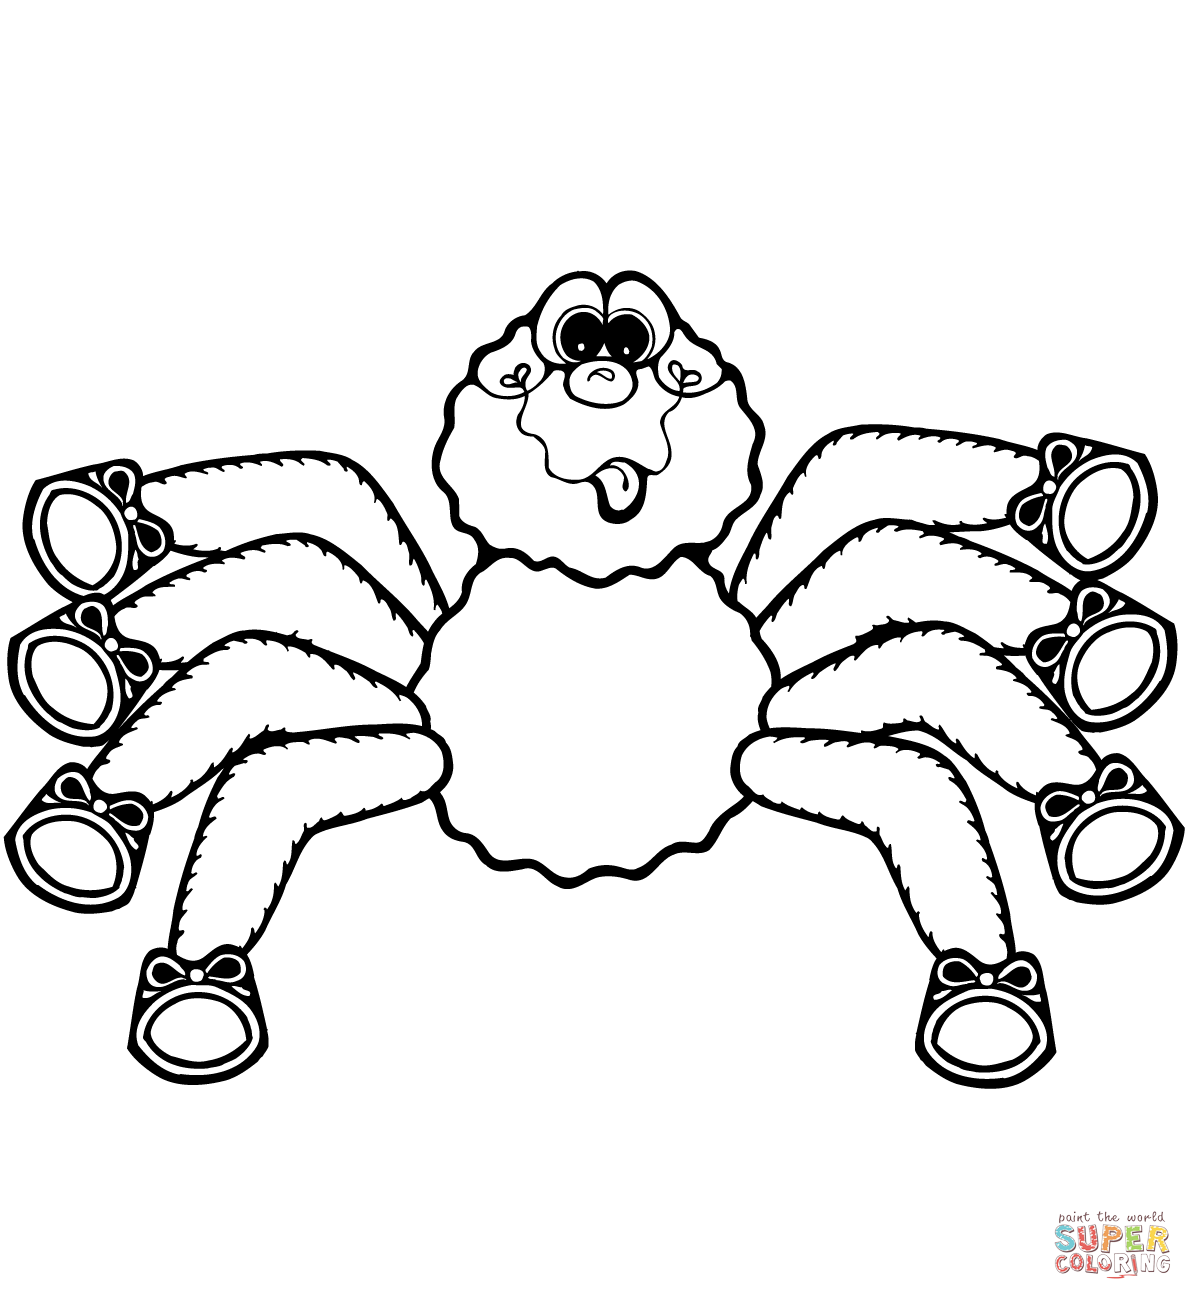 Spider coloring #9, Download drawings